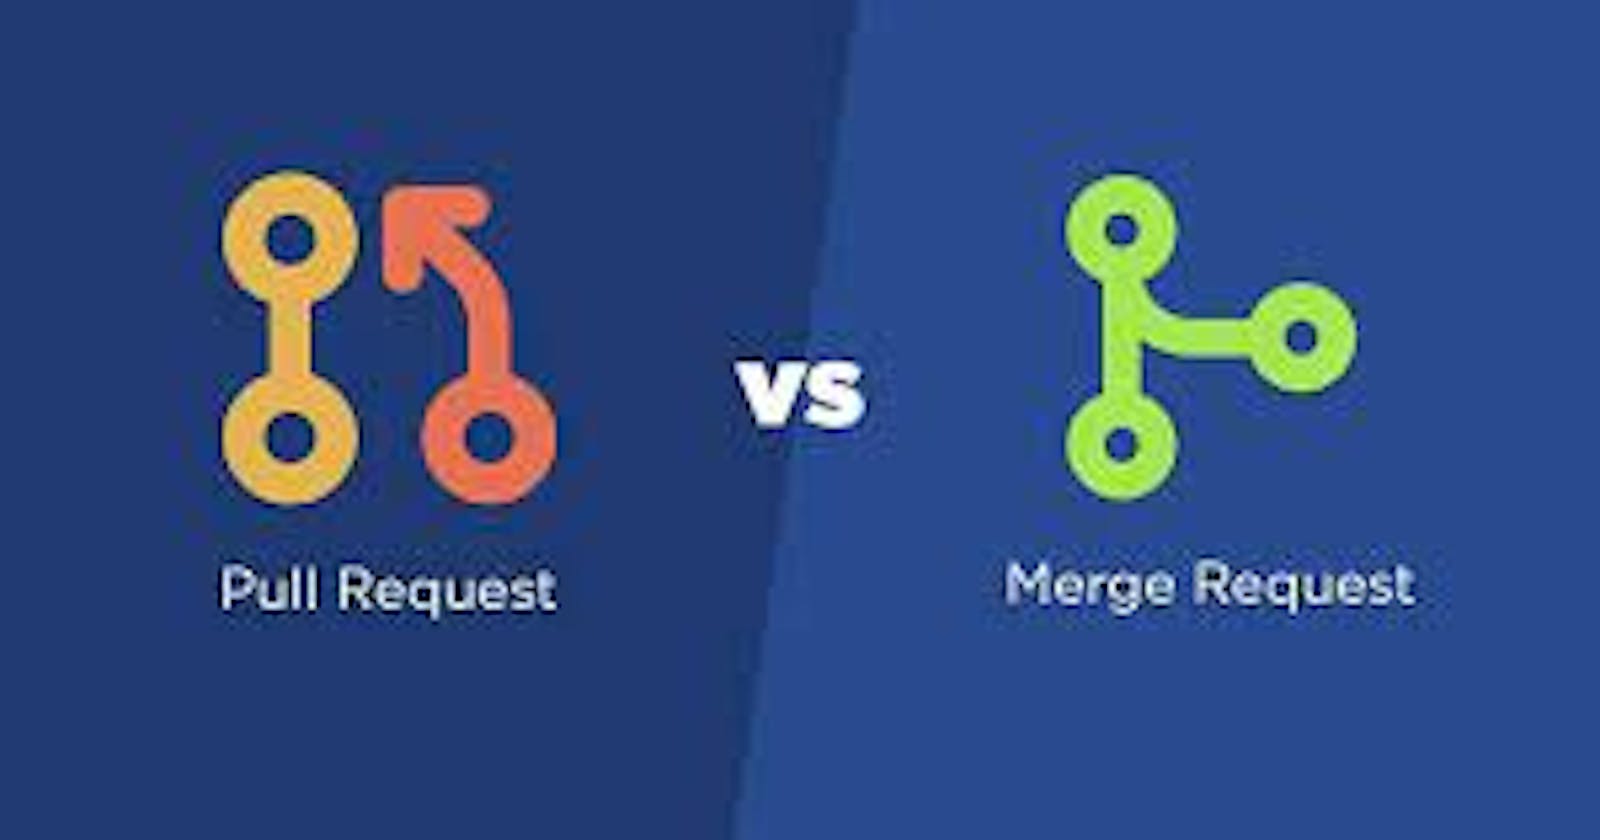 What is the Difference between Pull and Merge Requests in Git?